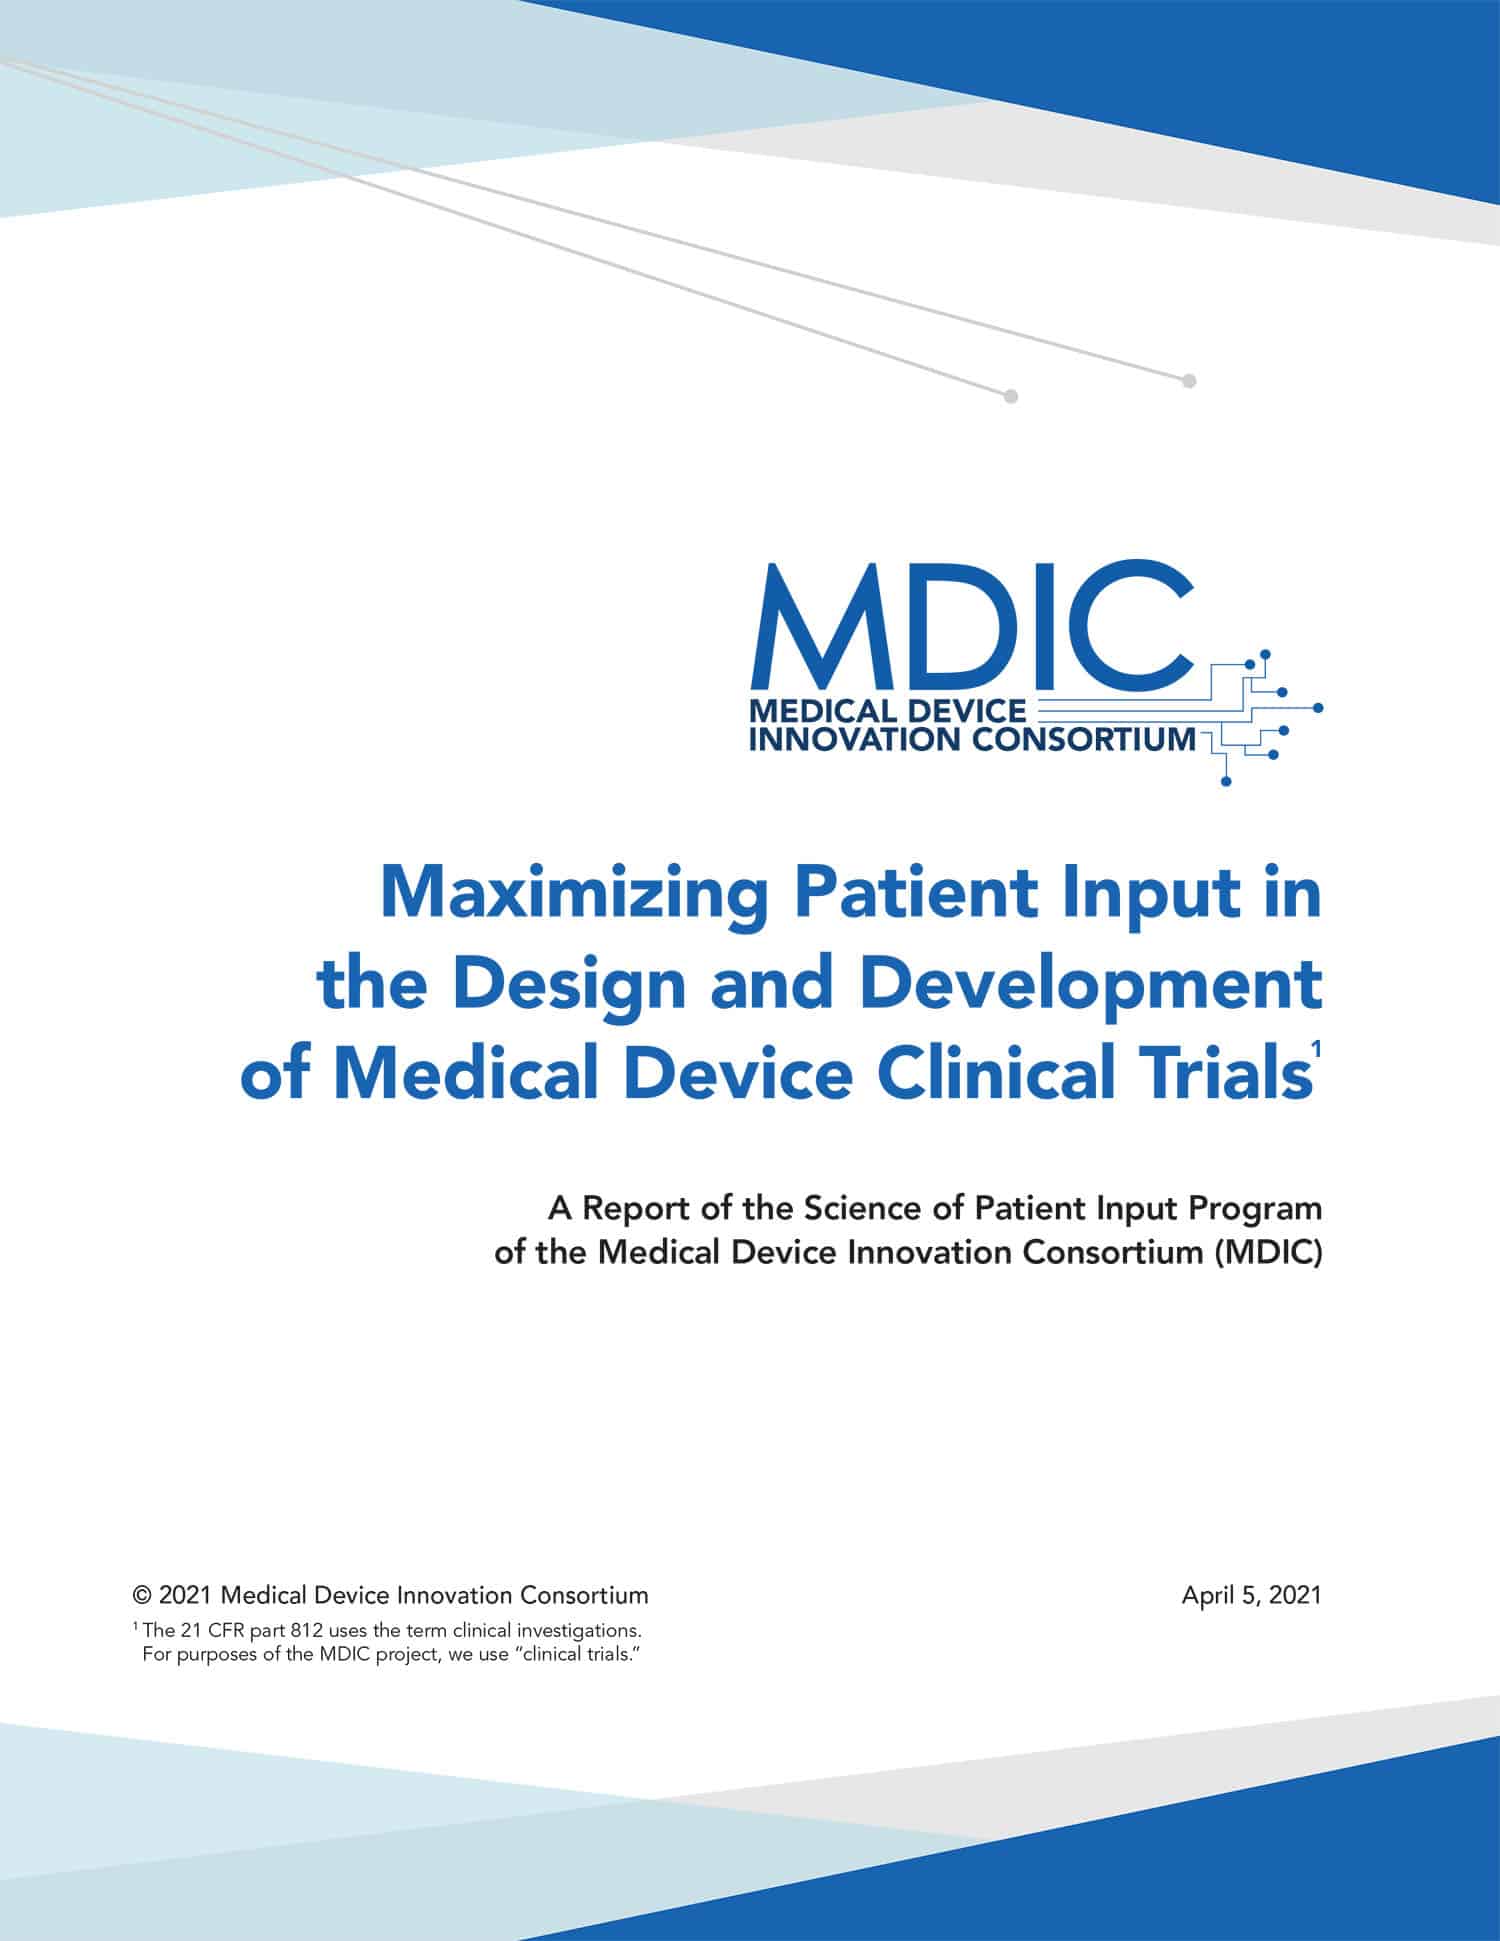 MDIC’s Maximizing Patient Input in the Design and Development of Medical Device Clinical Trials Report